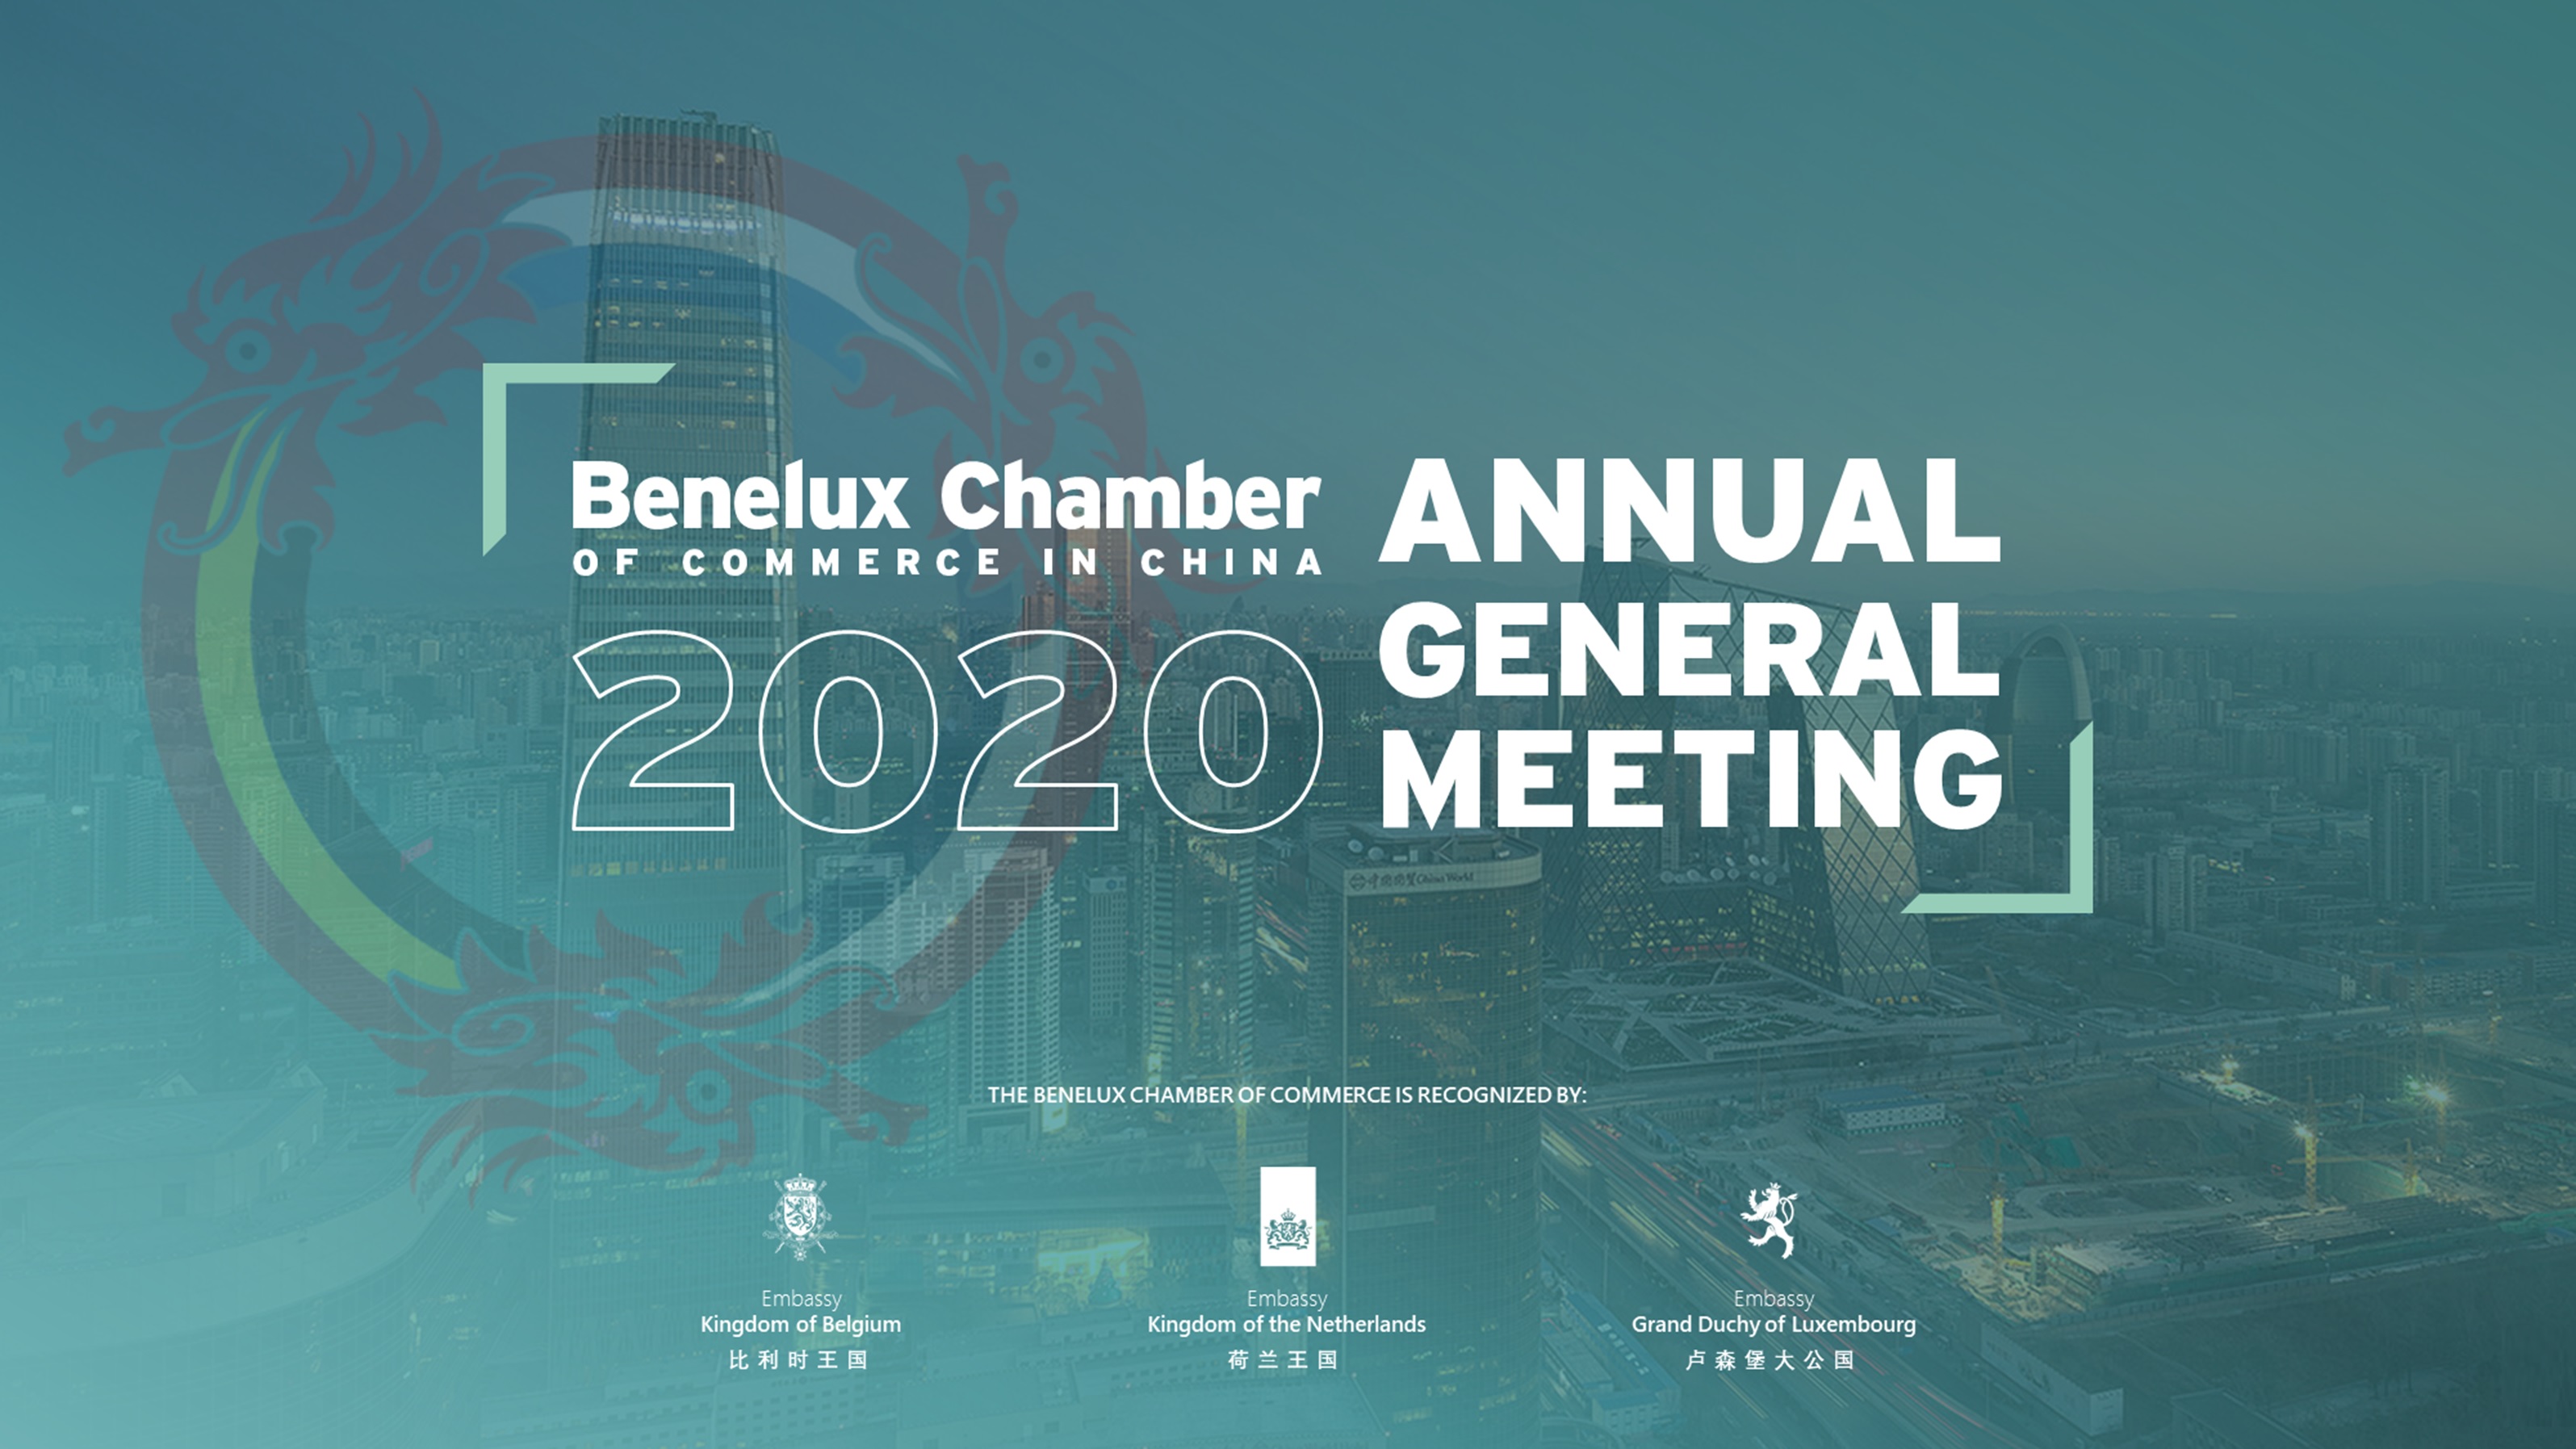 2020 Annual General Meeting | Benelux Chamber